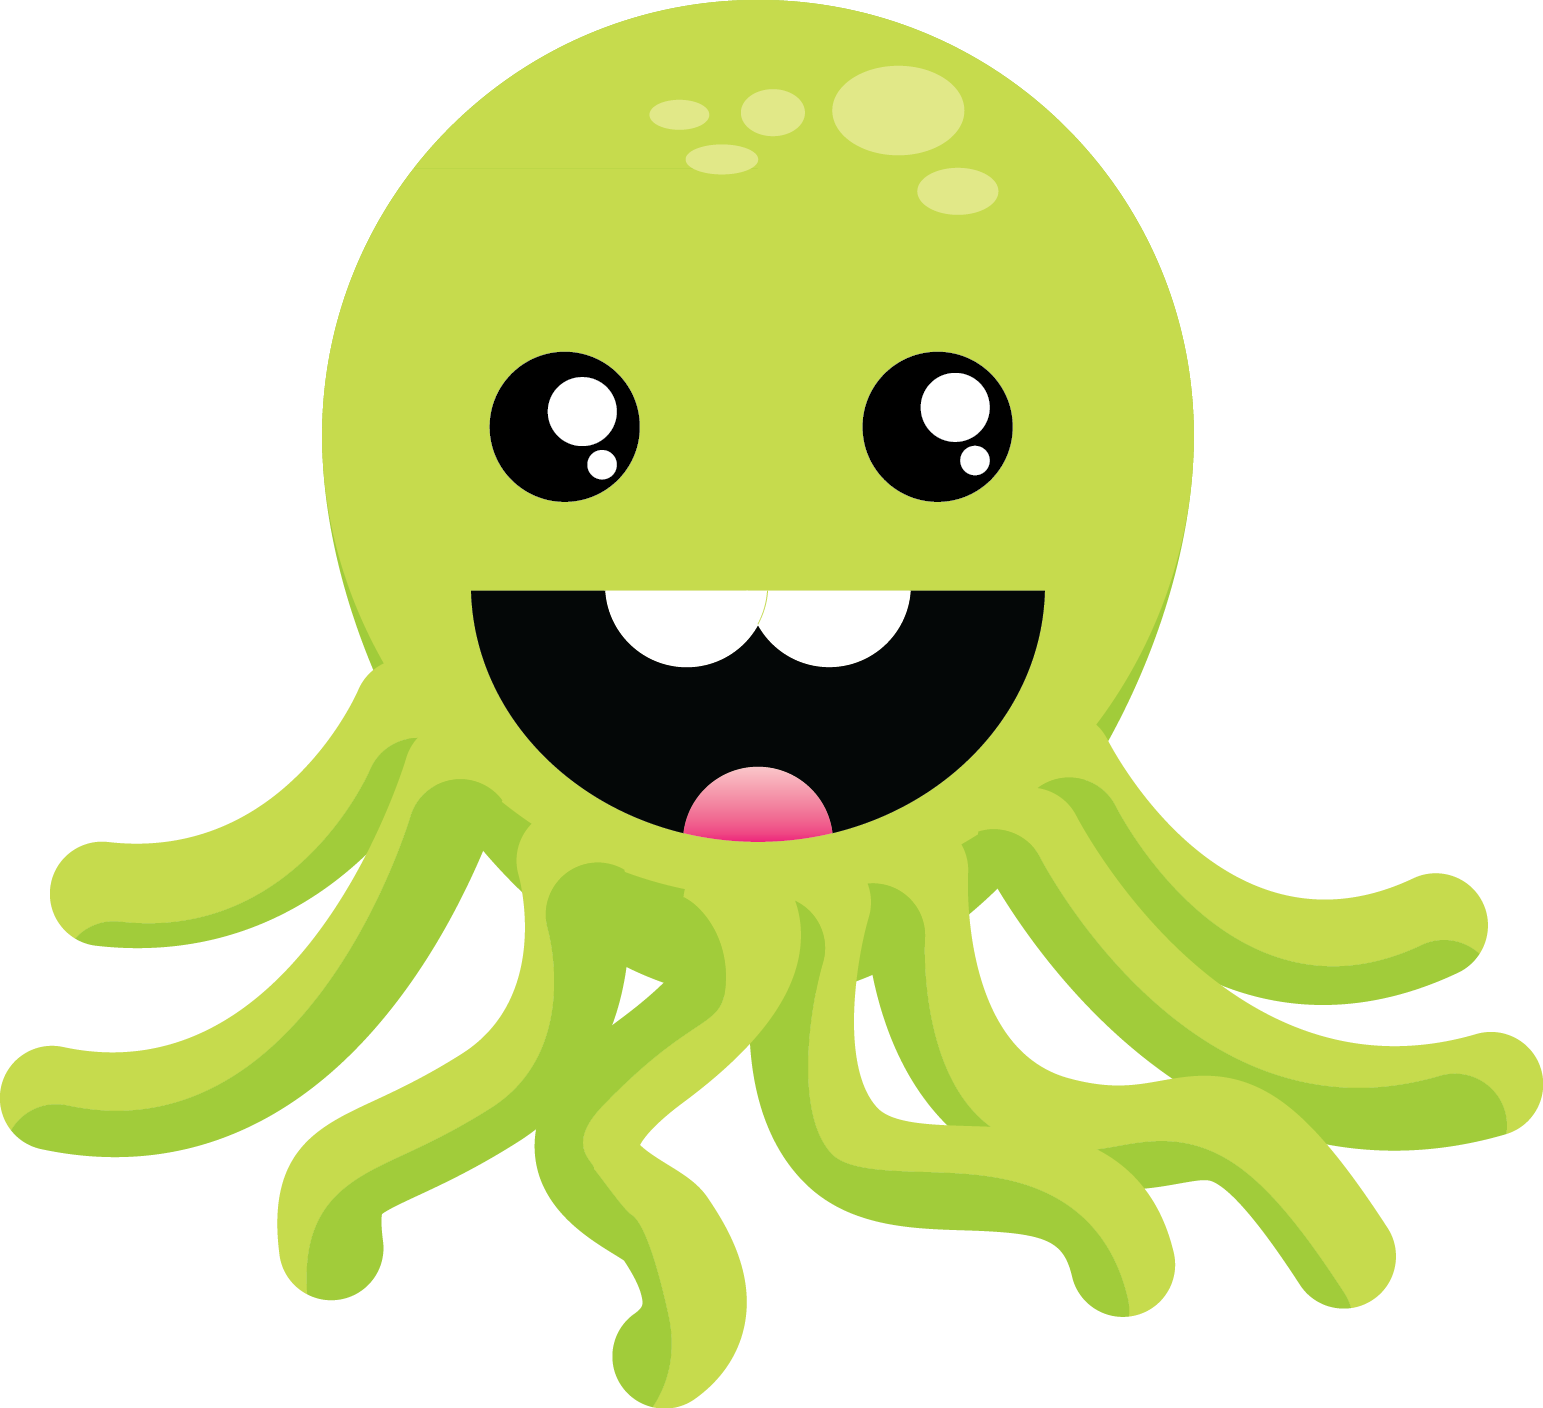 Download PNG image - Cute Octopus PNG Image 